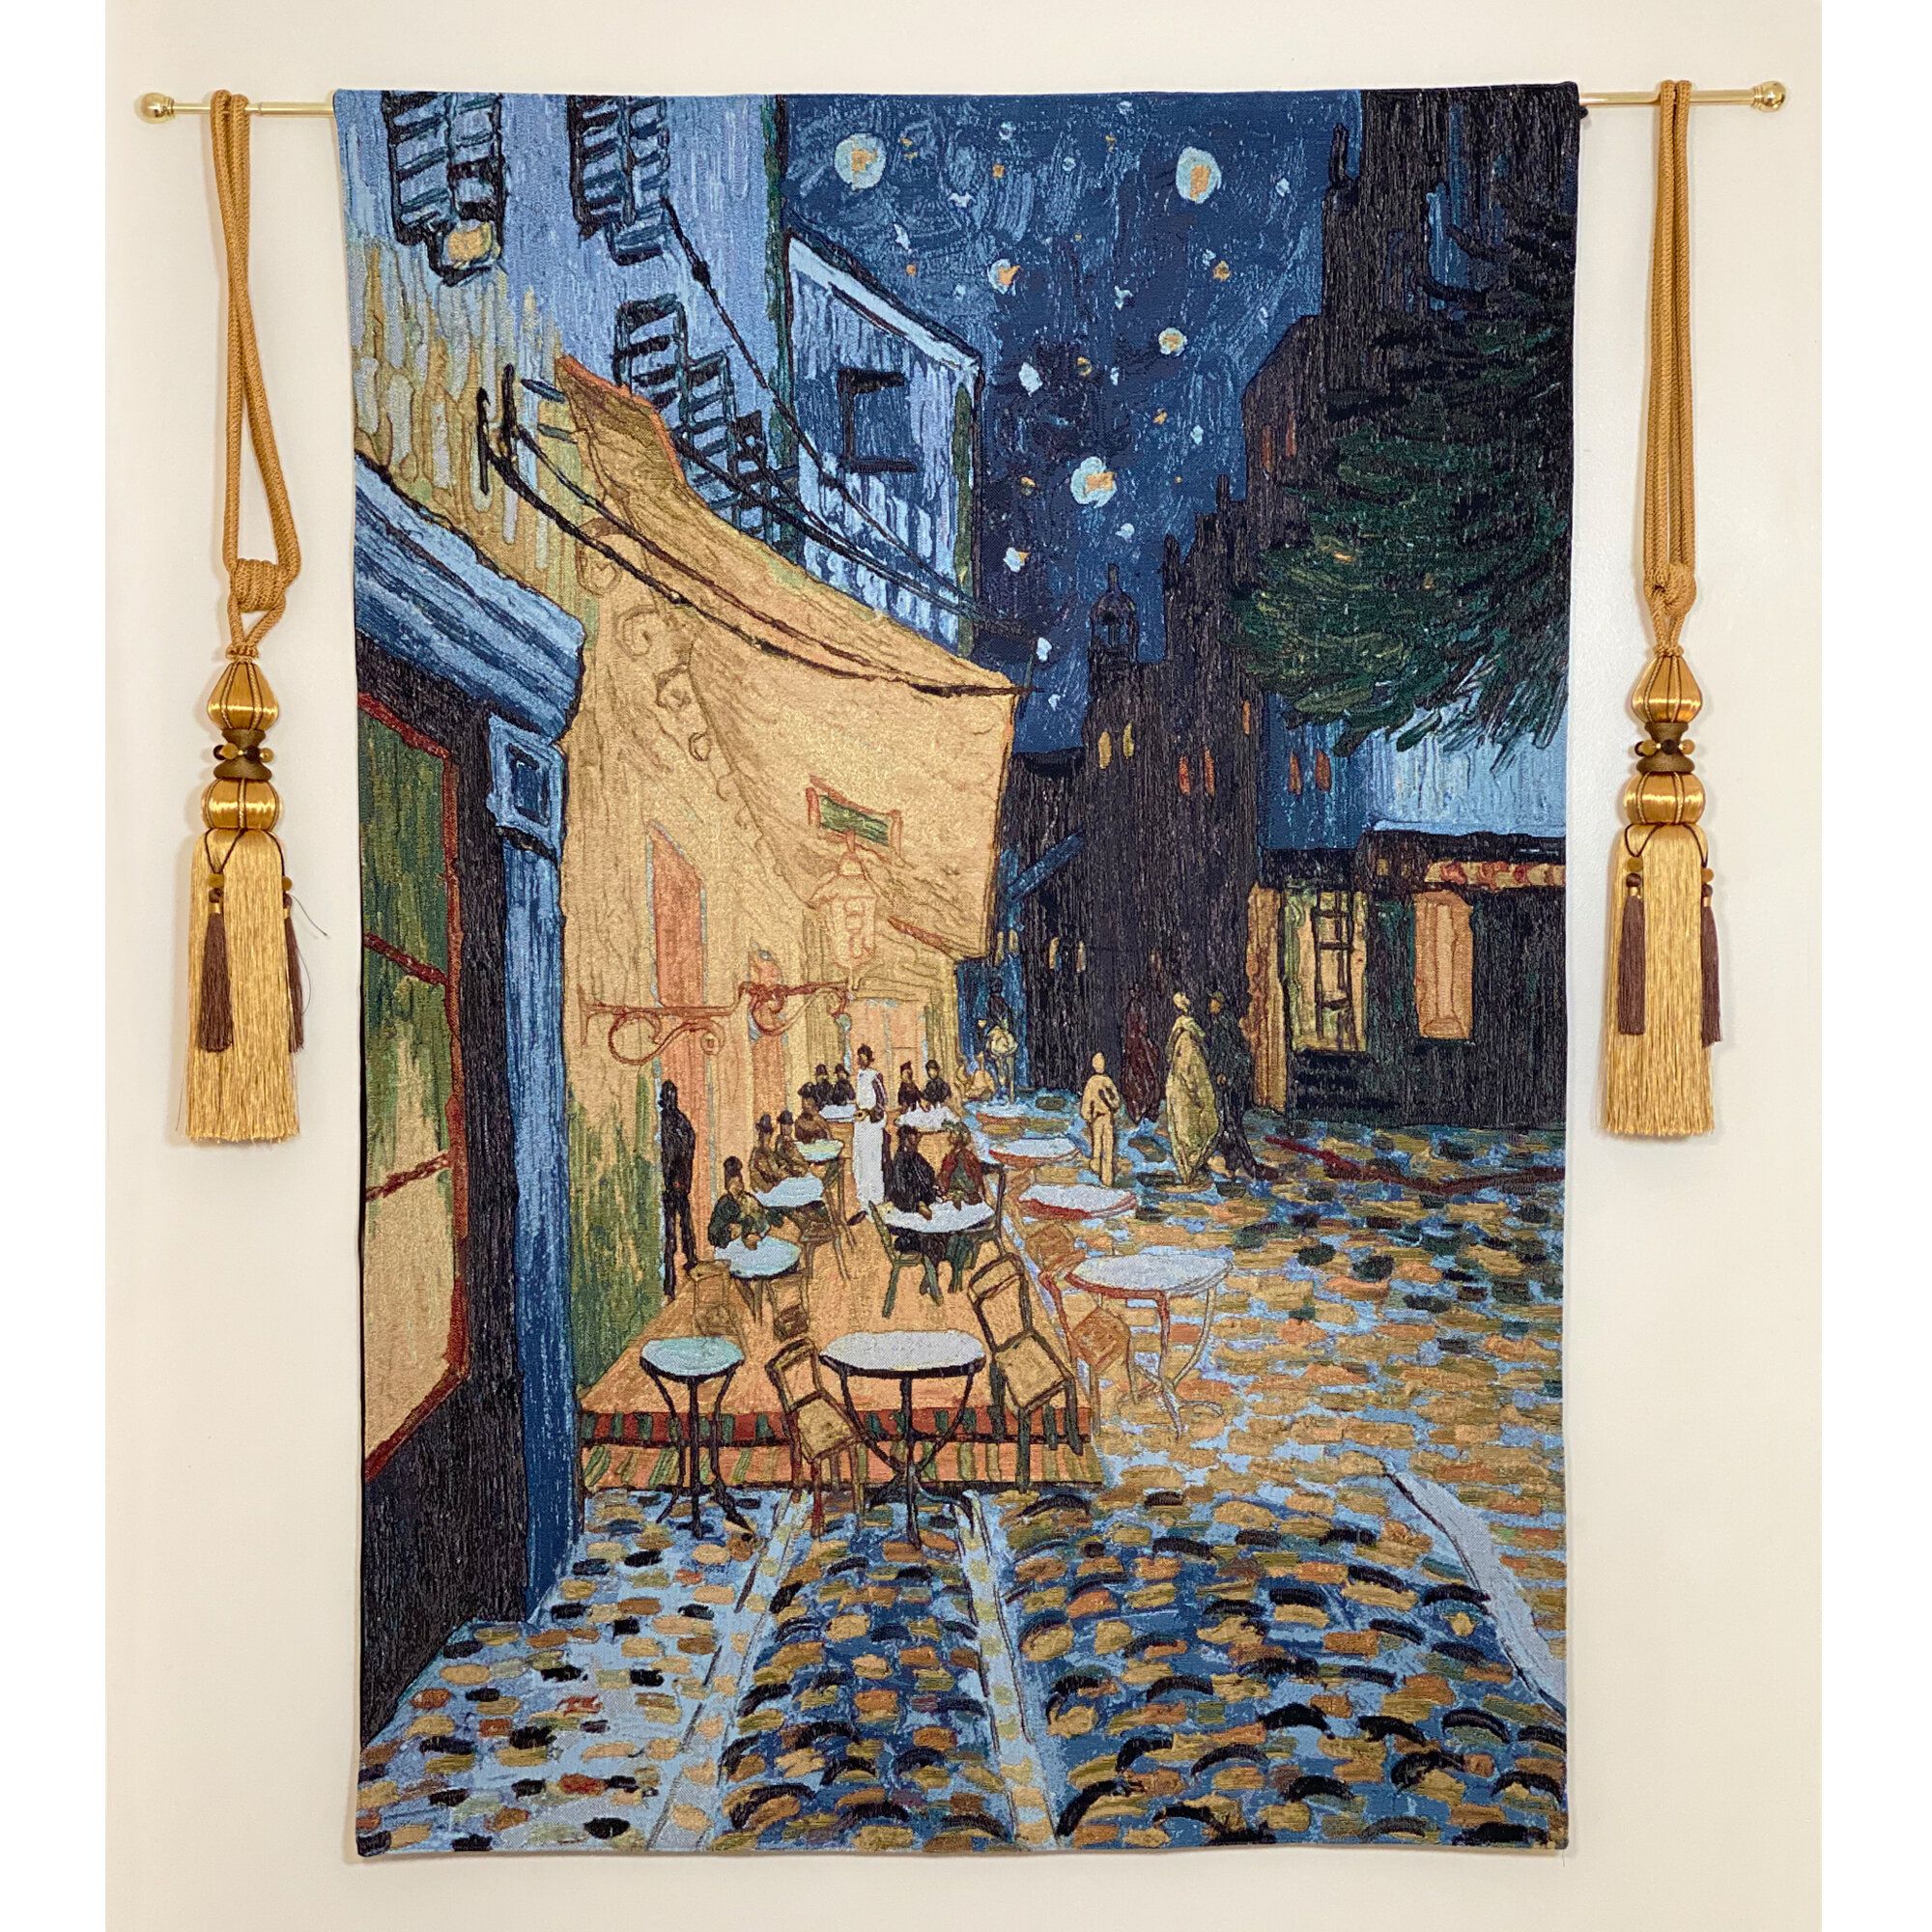 Cotton Van Gogh Café Terrace Wall Hanging With Most Recent Blended Fabric Van Gogh Terrace Wall Hangings (View 1 of 20)